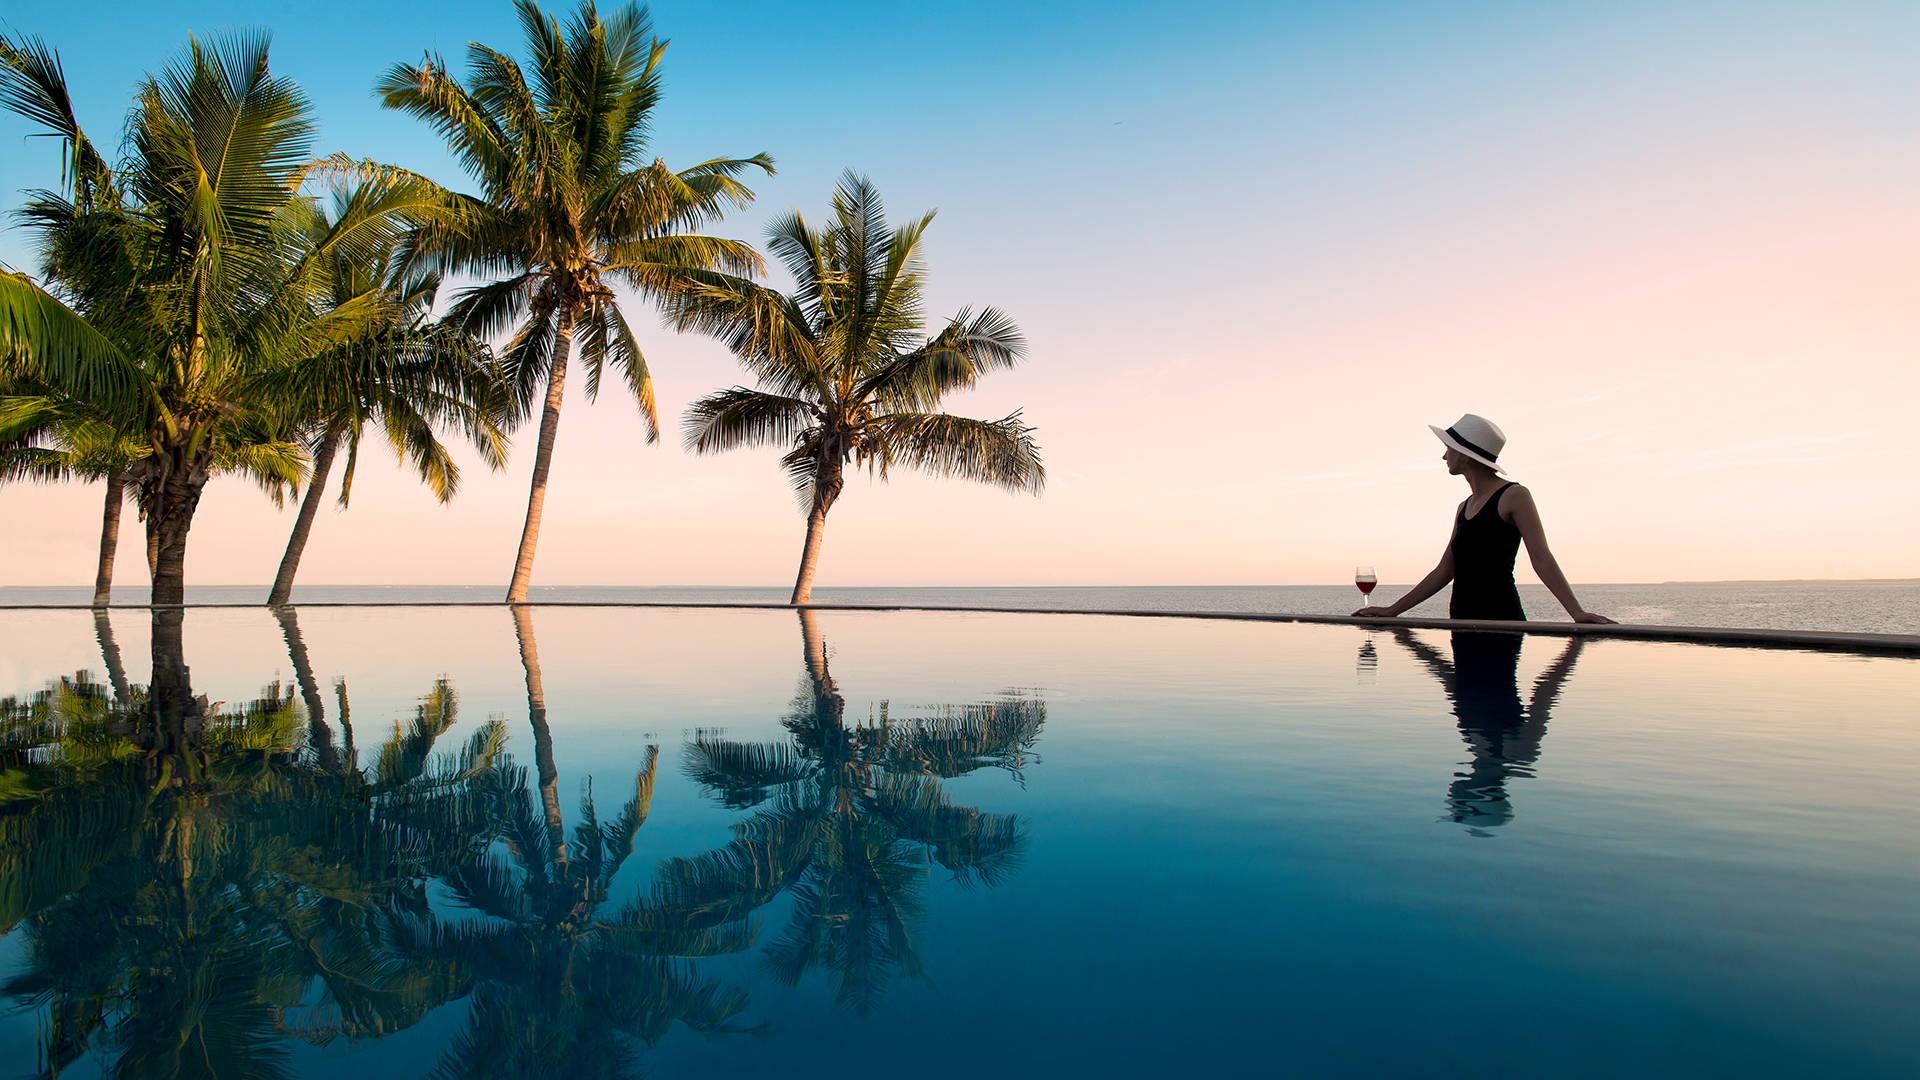 Infinity Pool At Mozambique Hotel Wallpaper